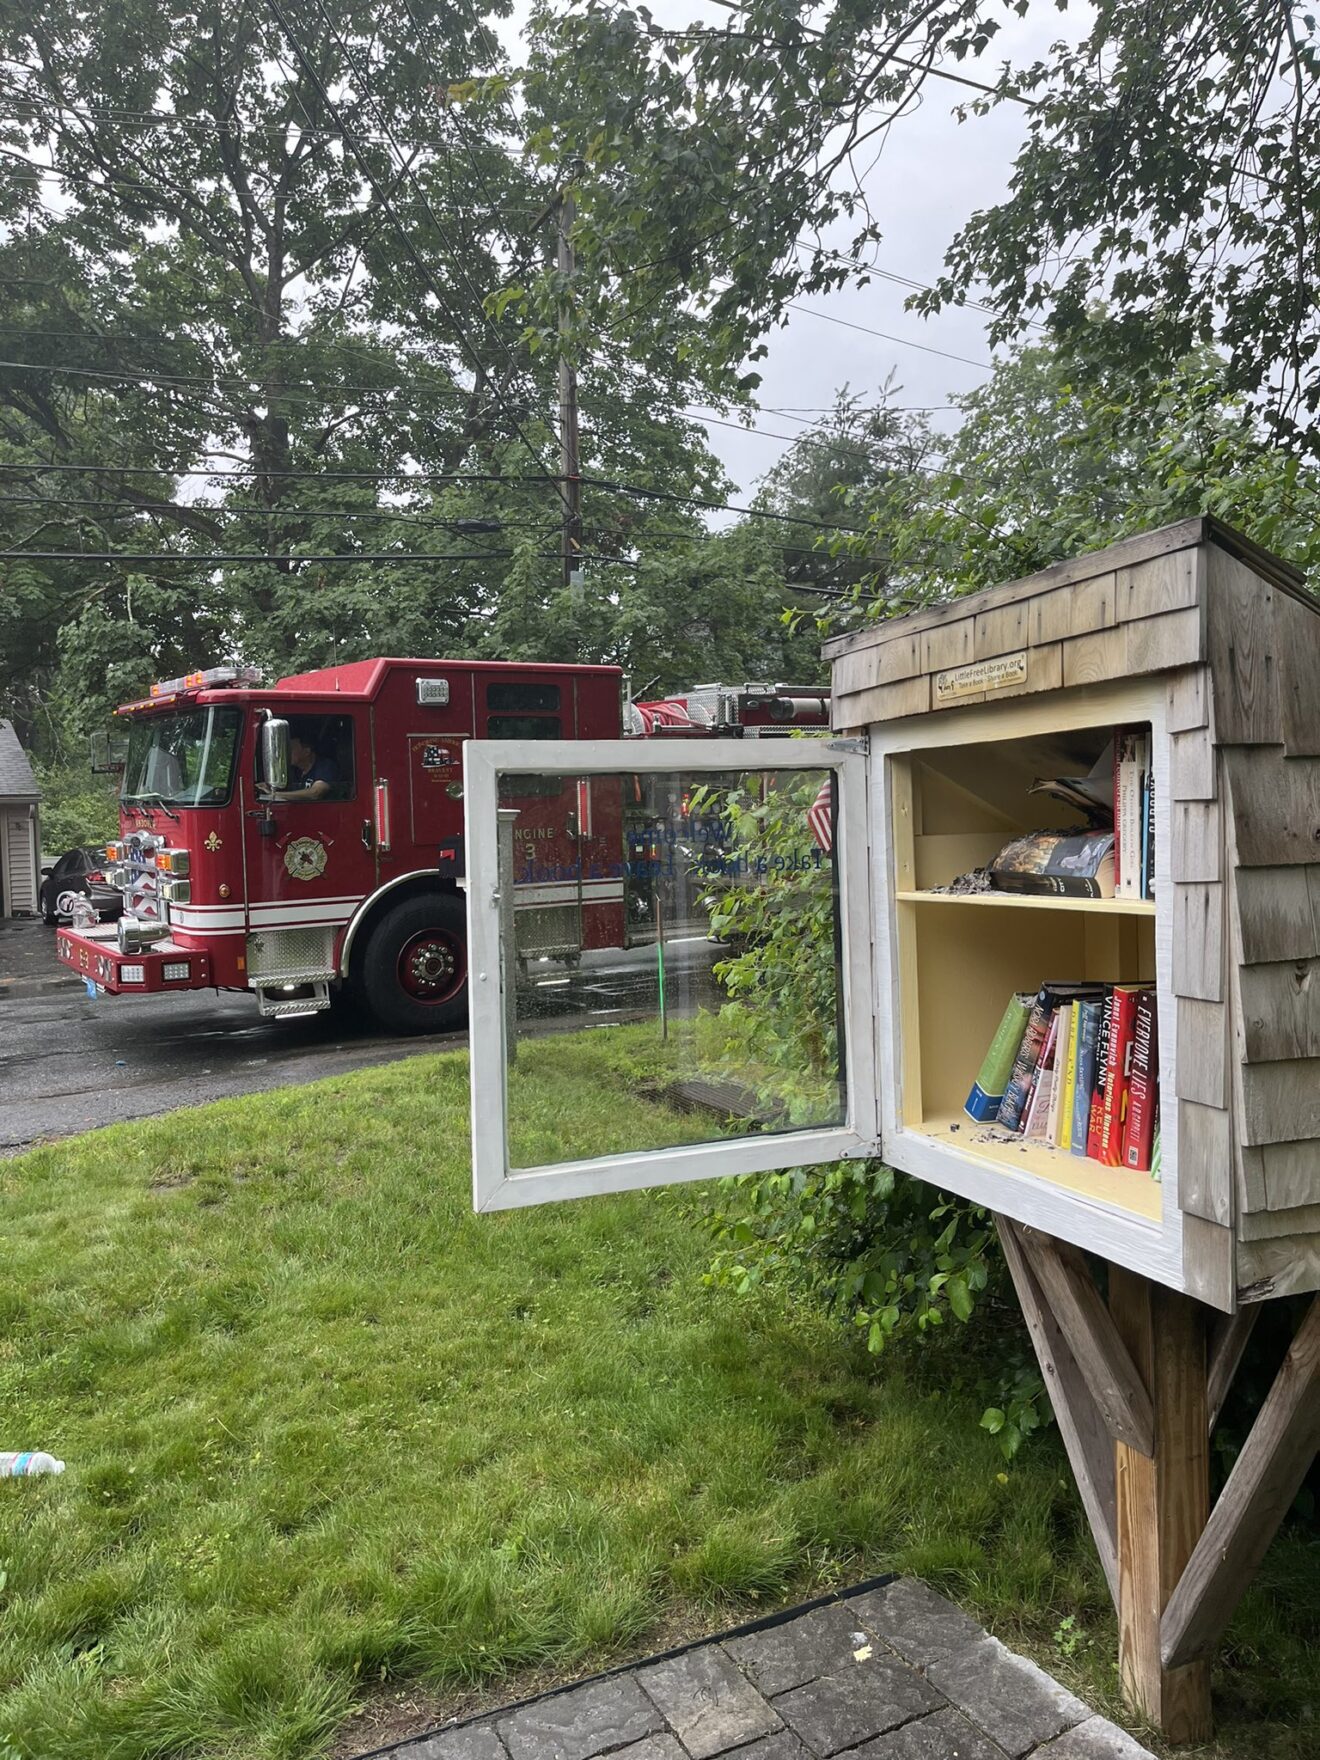 'Who Burns A Little Free Library?'